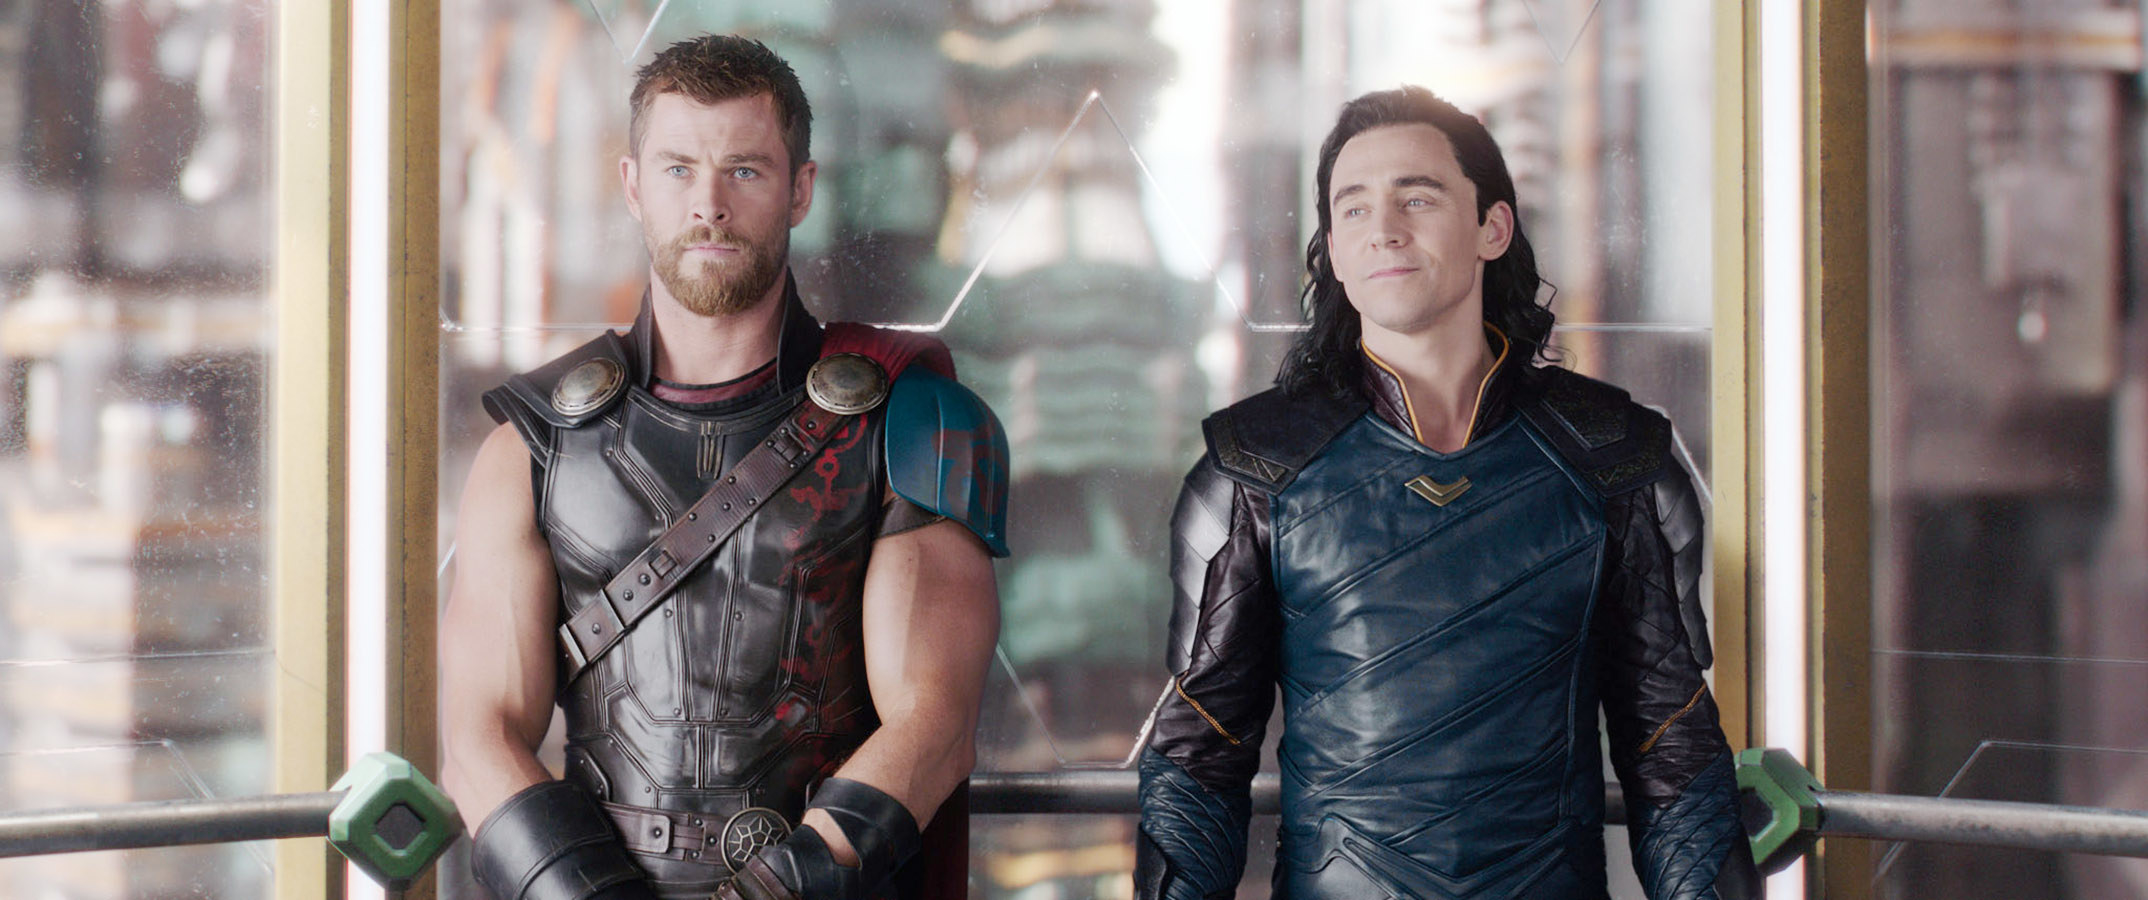 Thor and Loki standing side-by-side